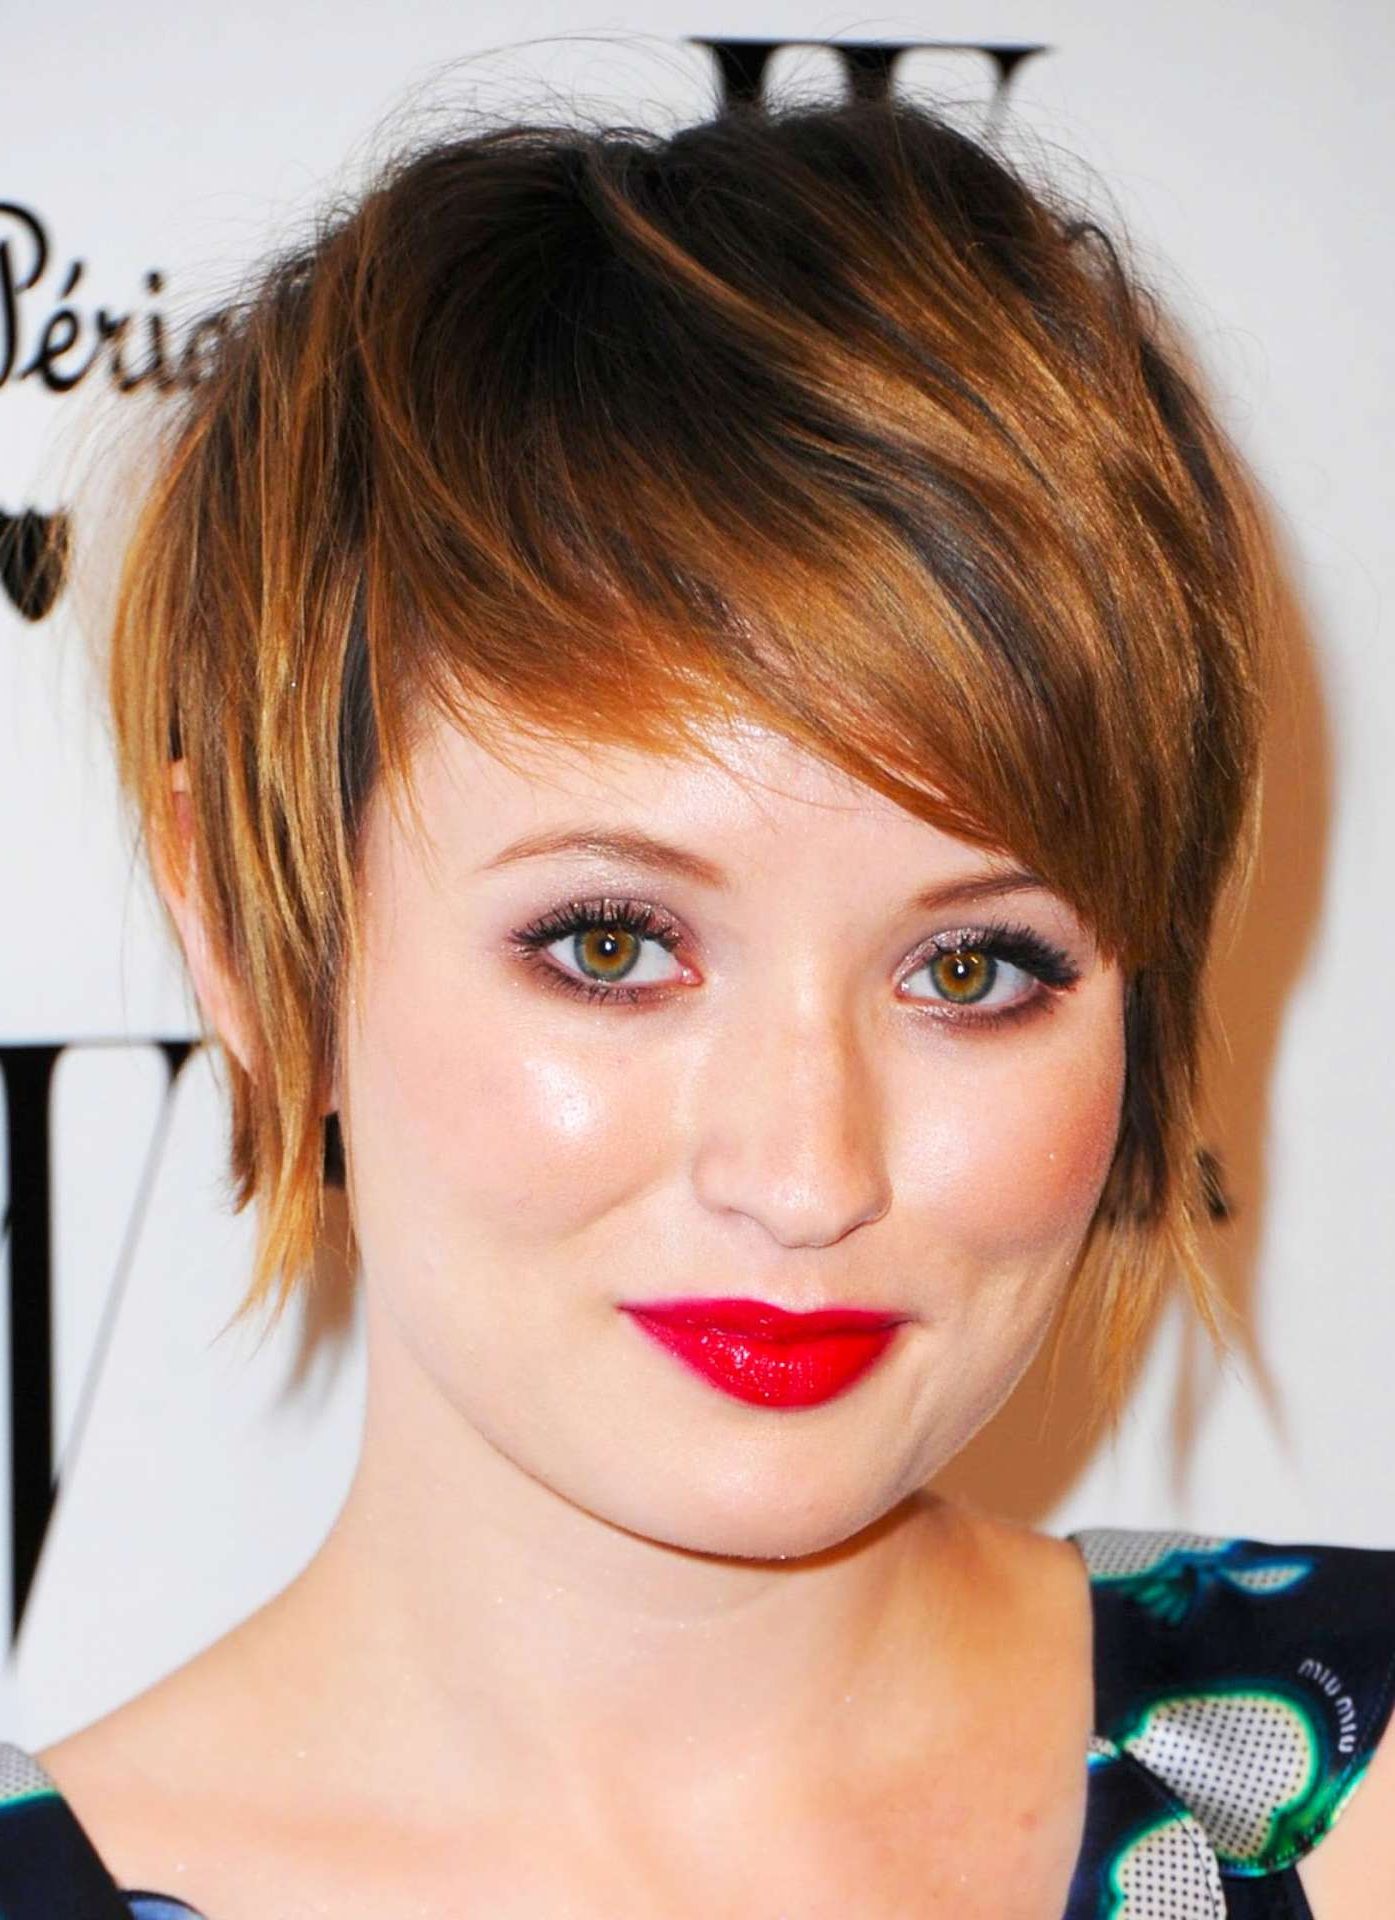 14 Best Short Haircuts For Women With Round Faces Within Short Haircuts For Round Faces With Curly Hair (View 6 of 25)